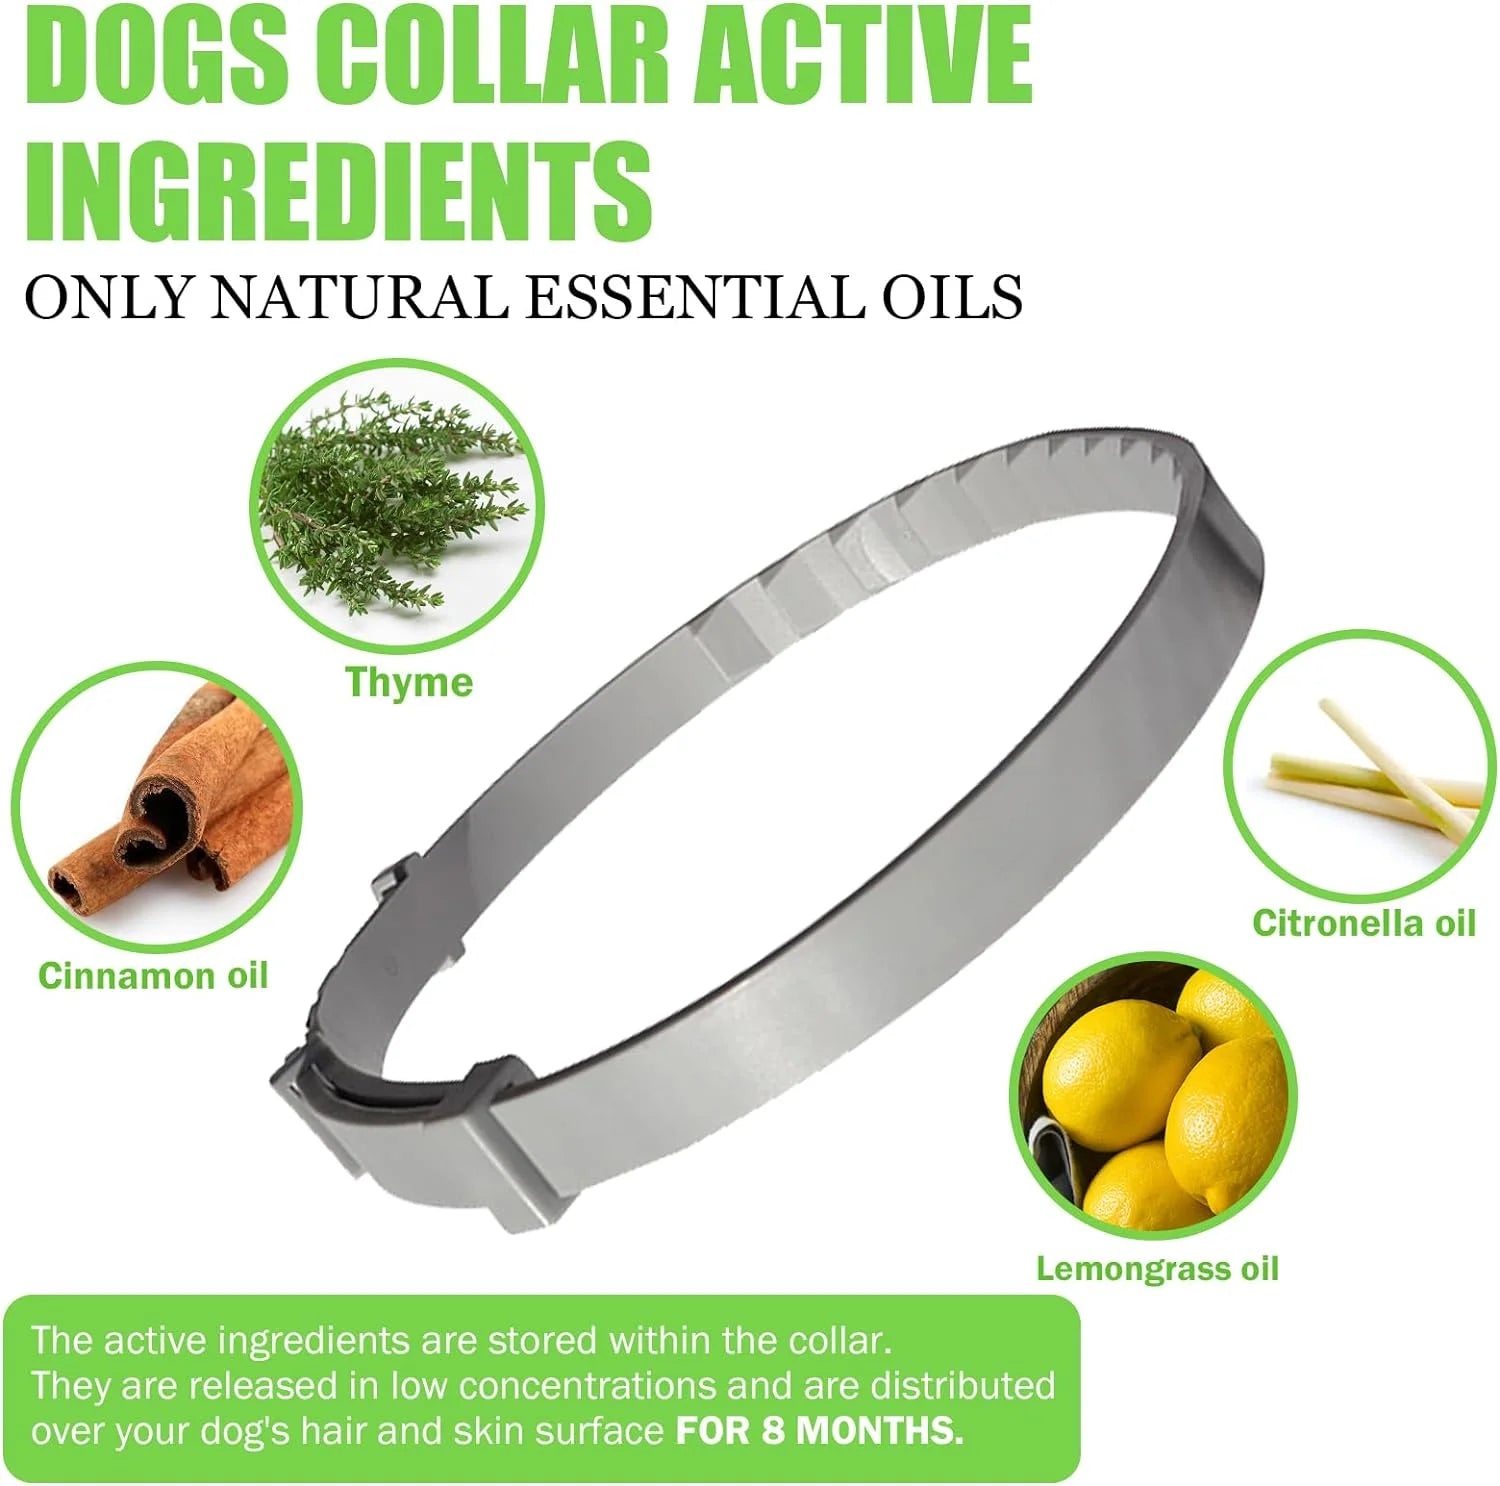 Flea Collar for Dogs, Dog Flea Collar 8 Months Protection, Flea and Tick Collar for Dogs Small to Large Size, Flea Prevention for Dogs 2 Pack with Comb and Prevention Treatment Drop